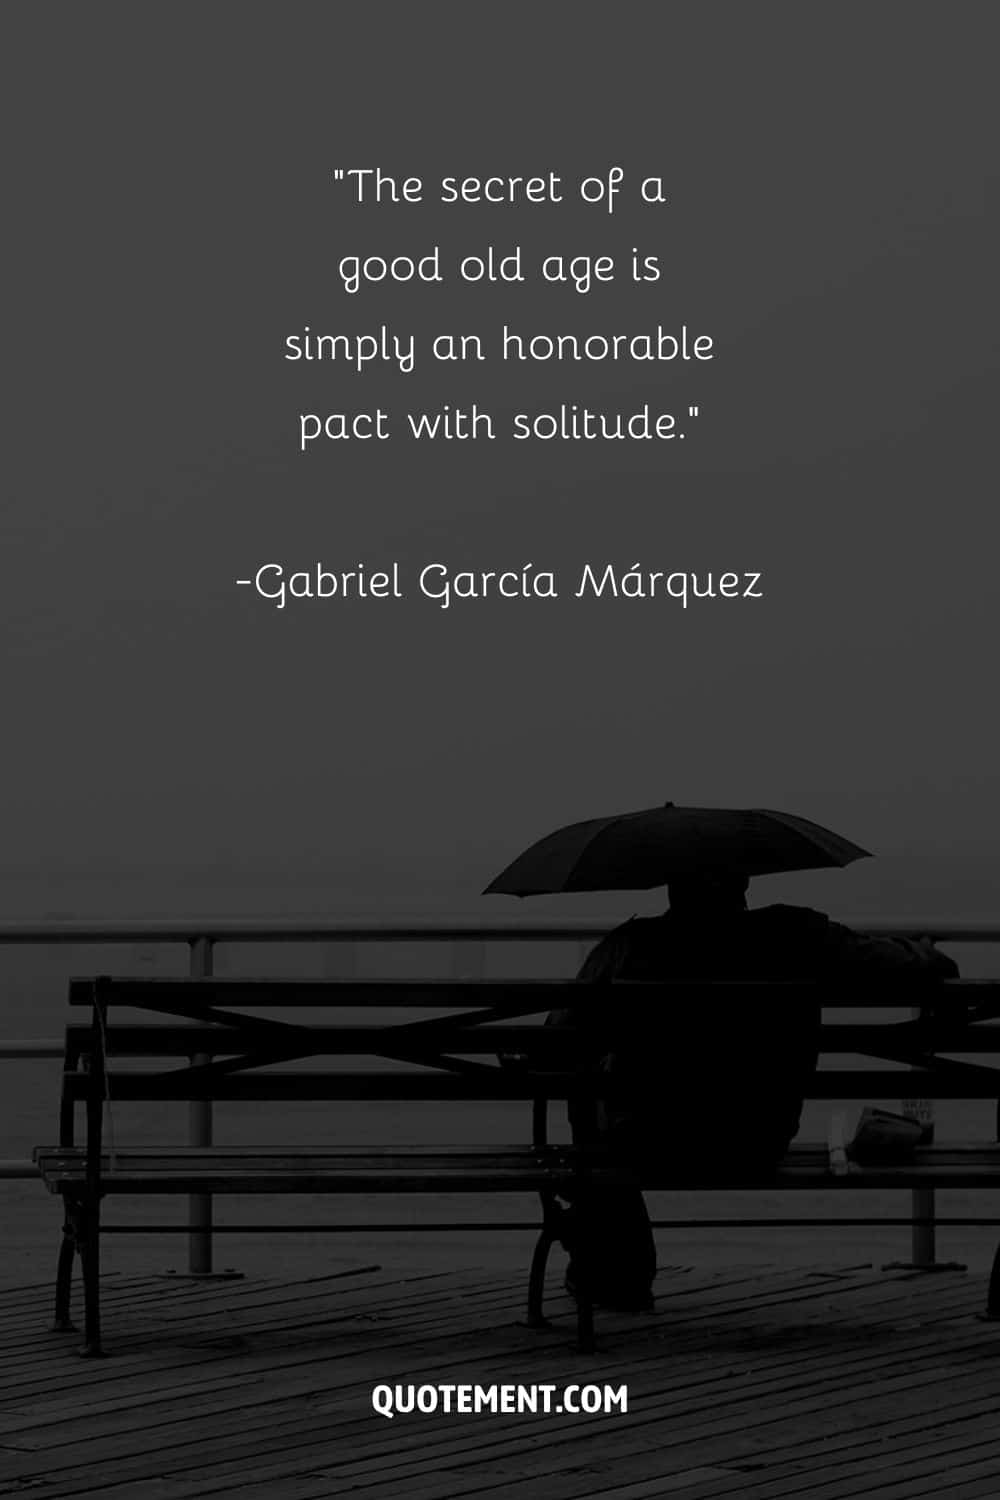 Old man sits, holding an umbrella representing wise solitude quote